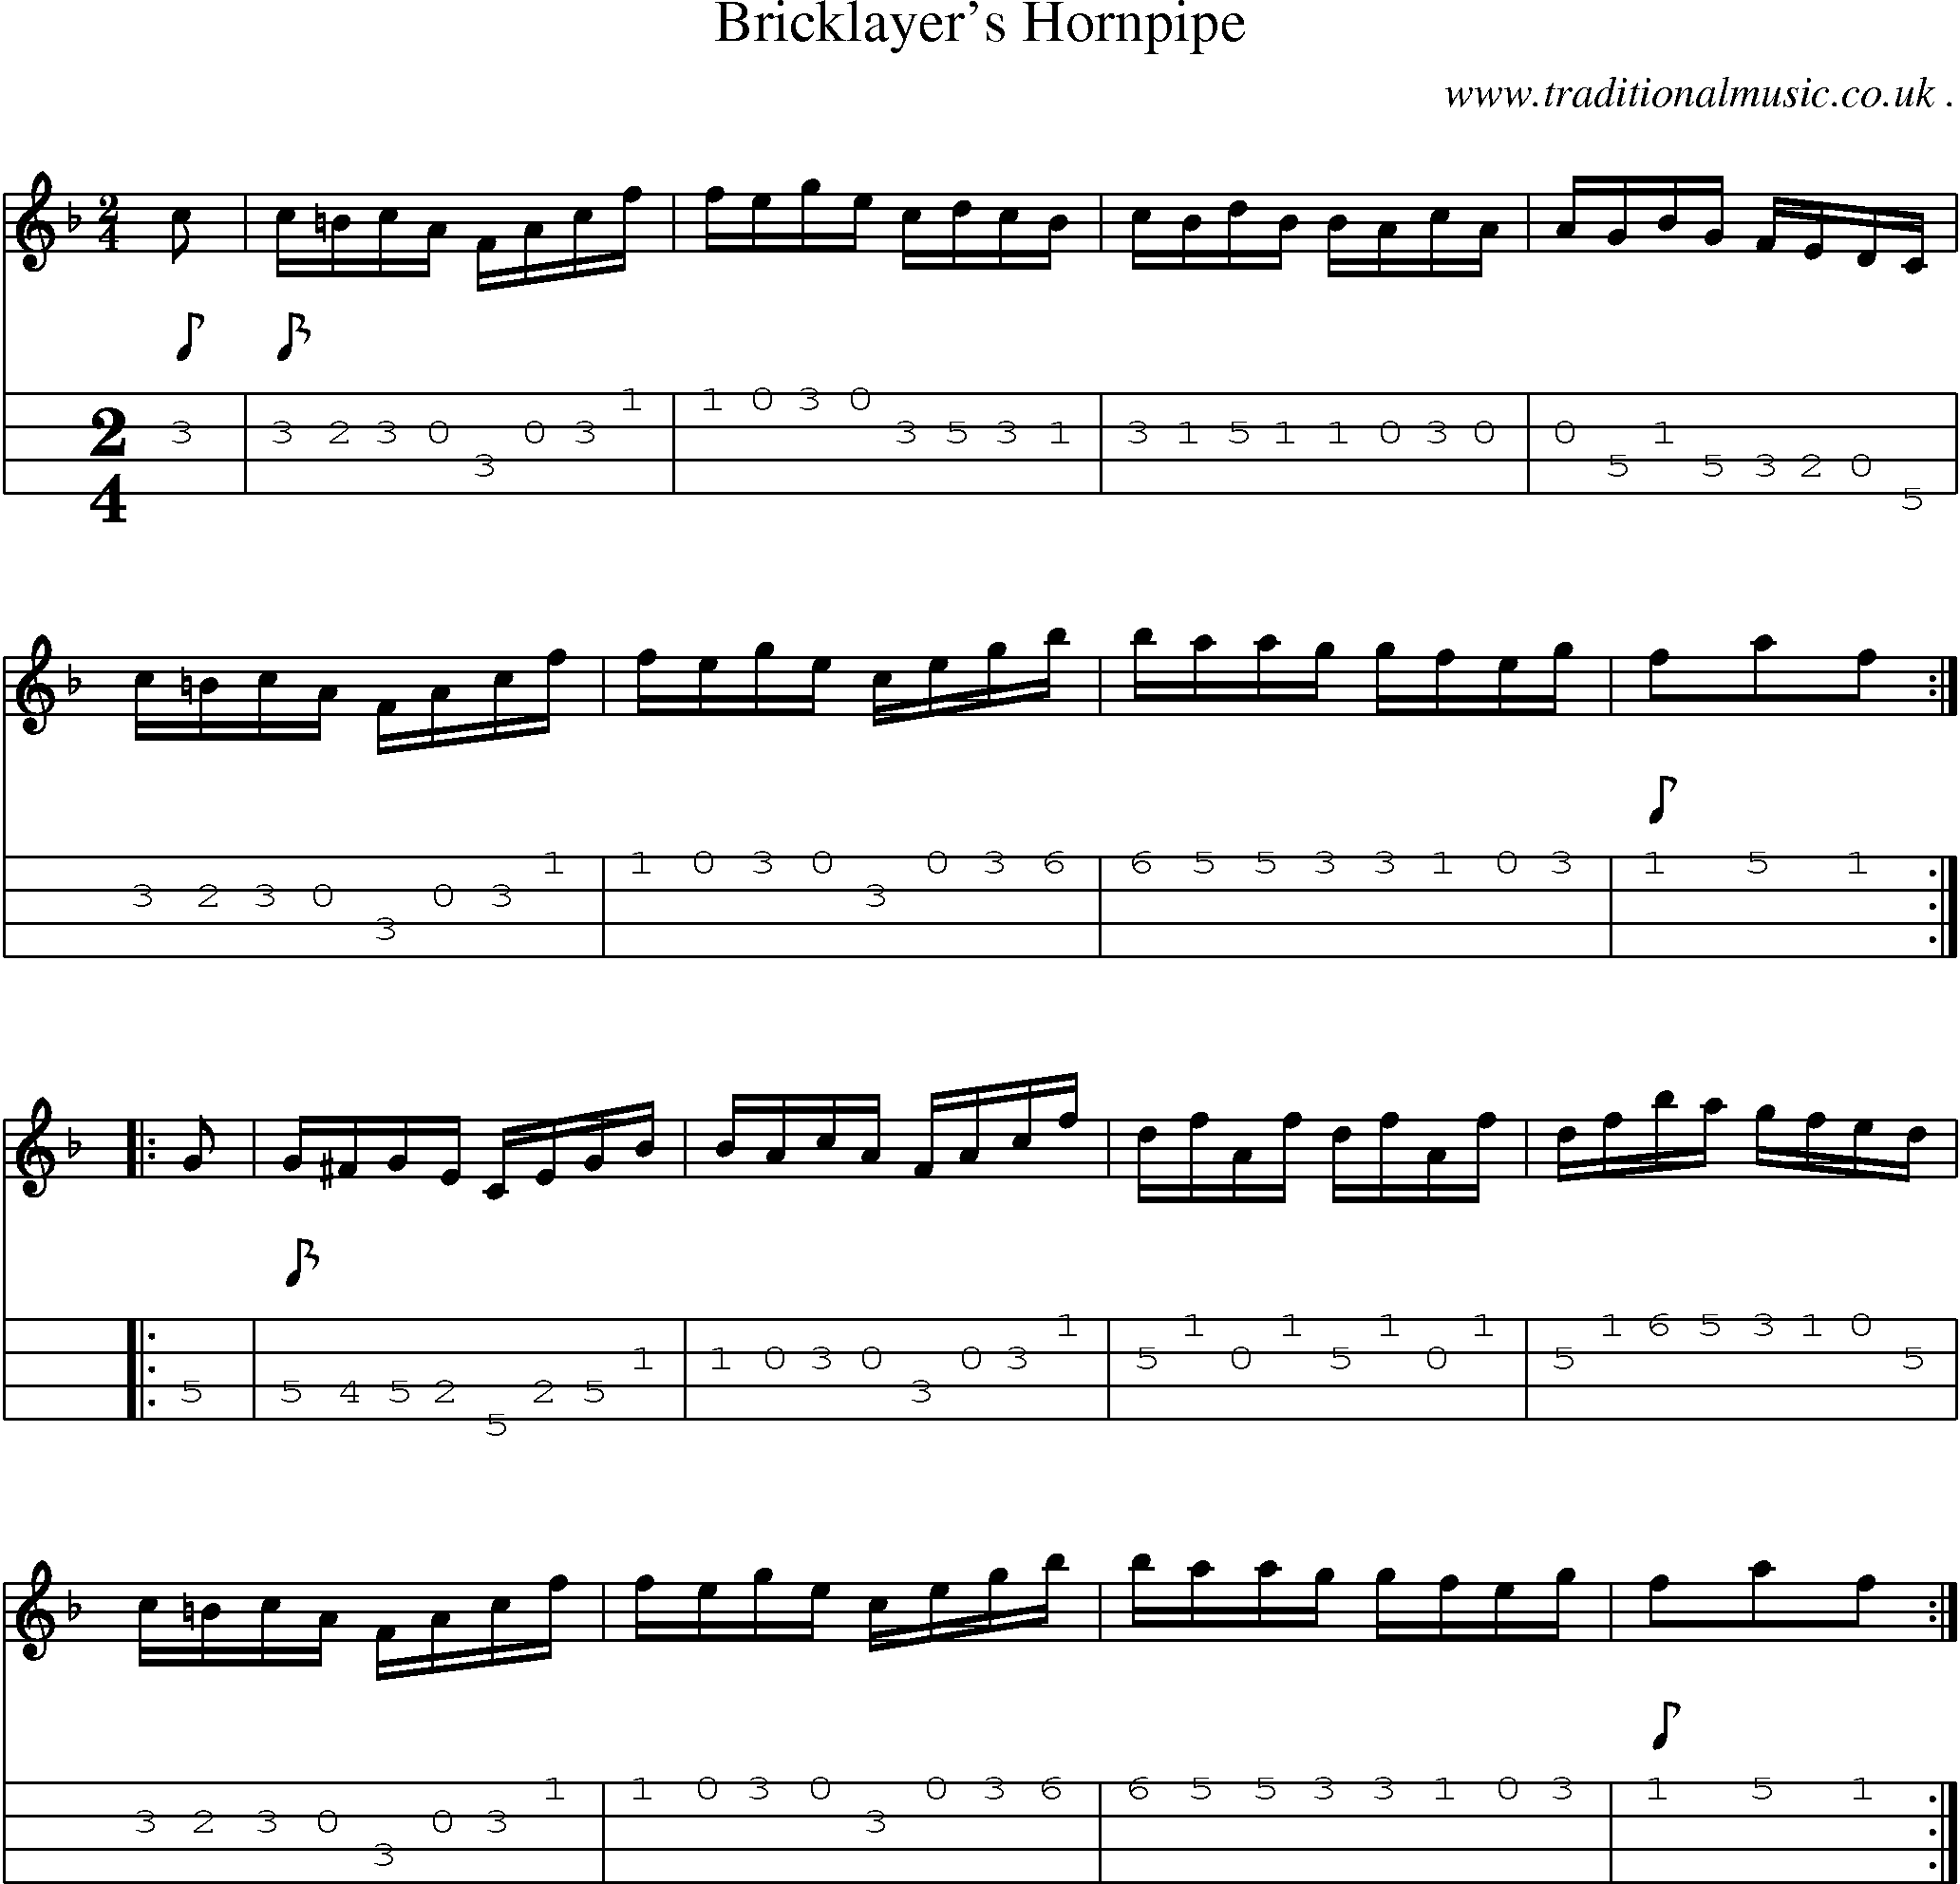 Sheet-Music and Mandolin Tabs for Bricklayers Hornpipe